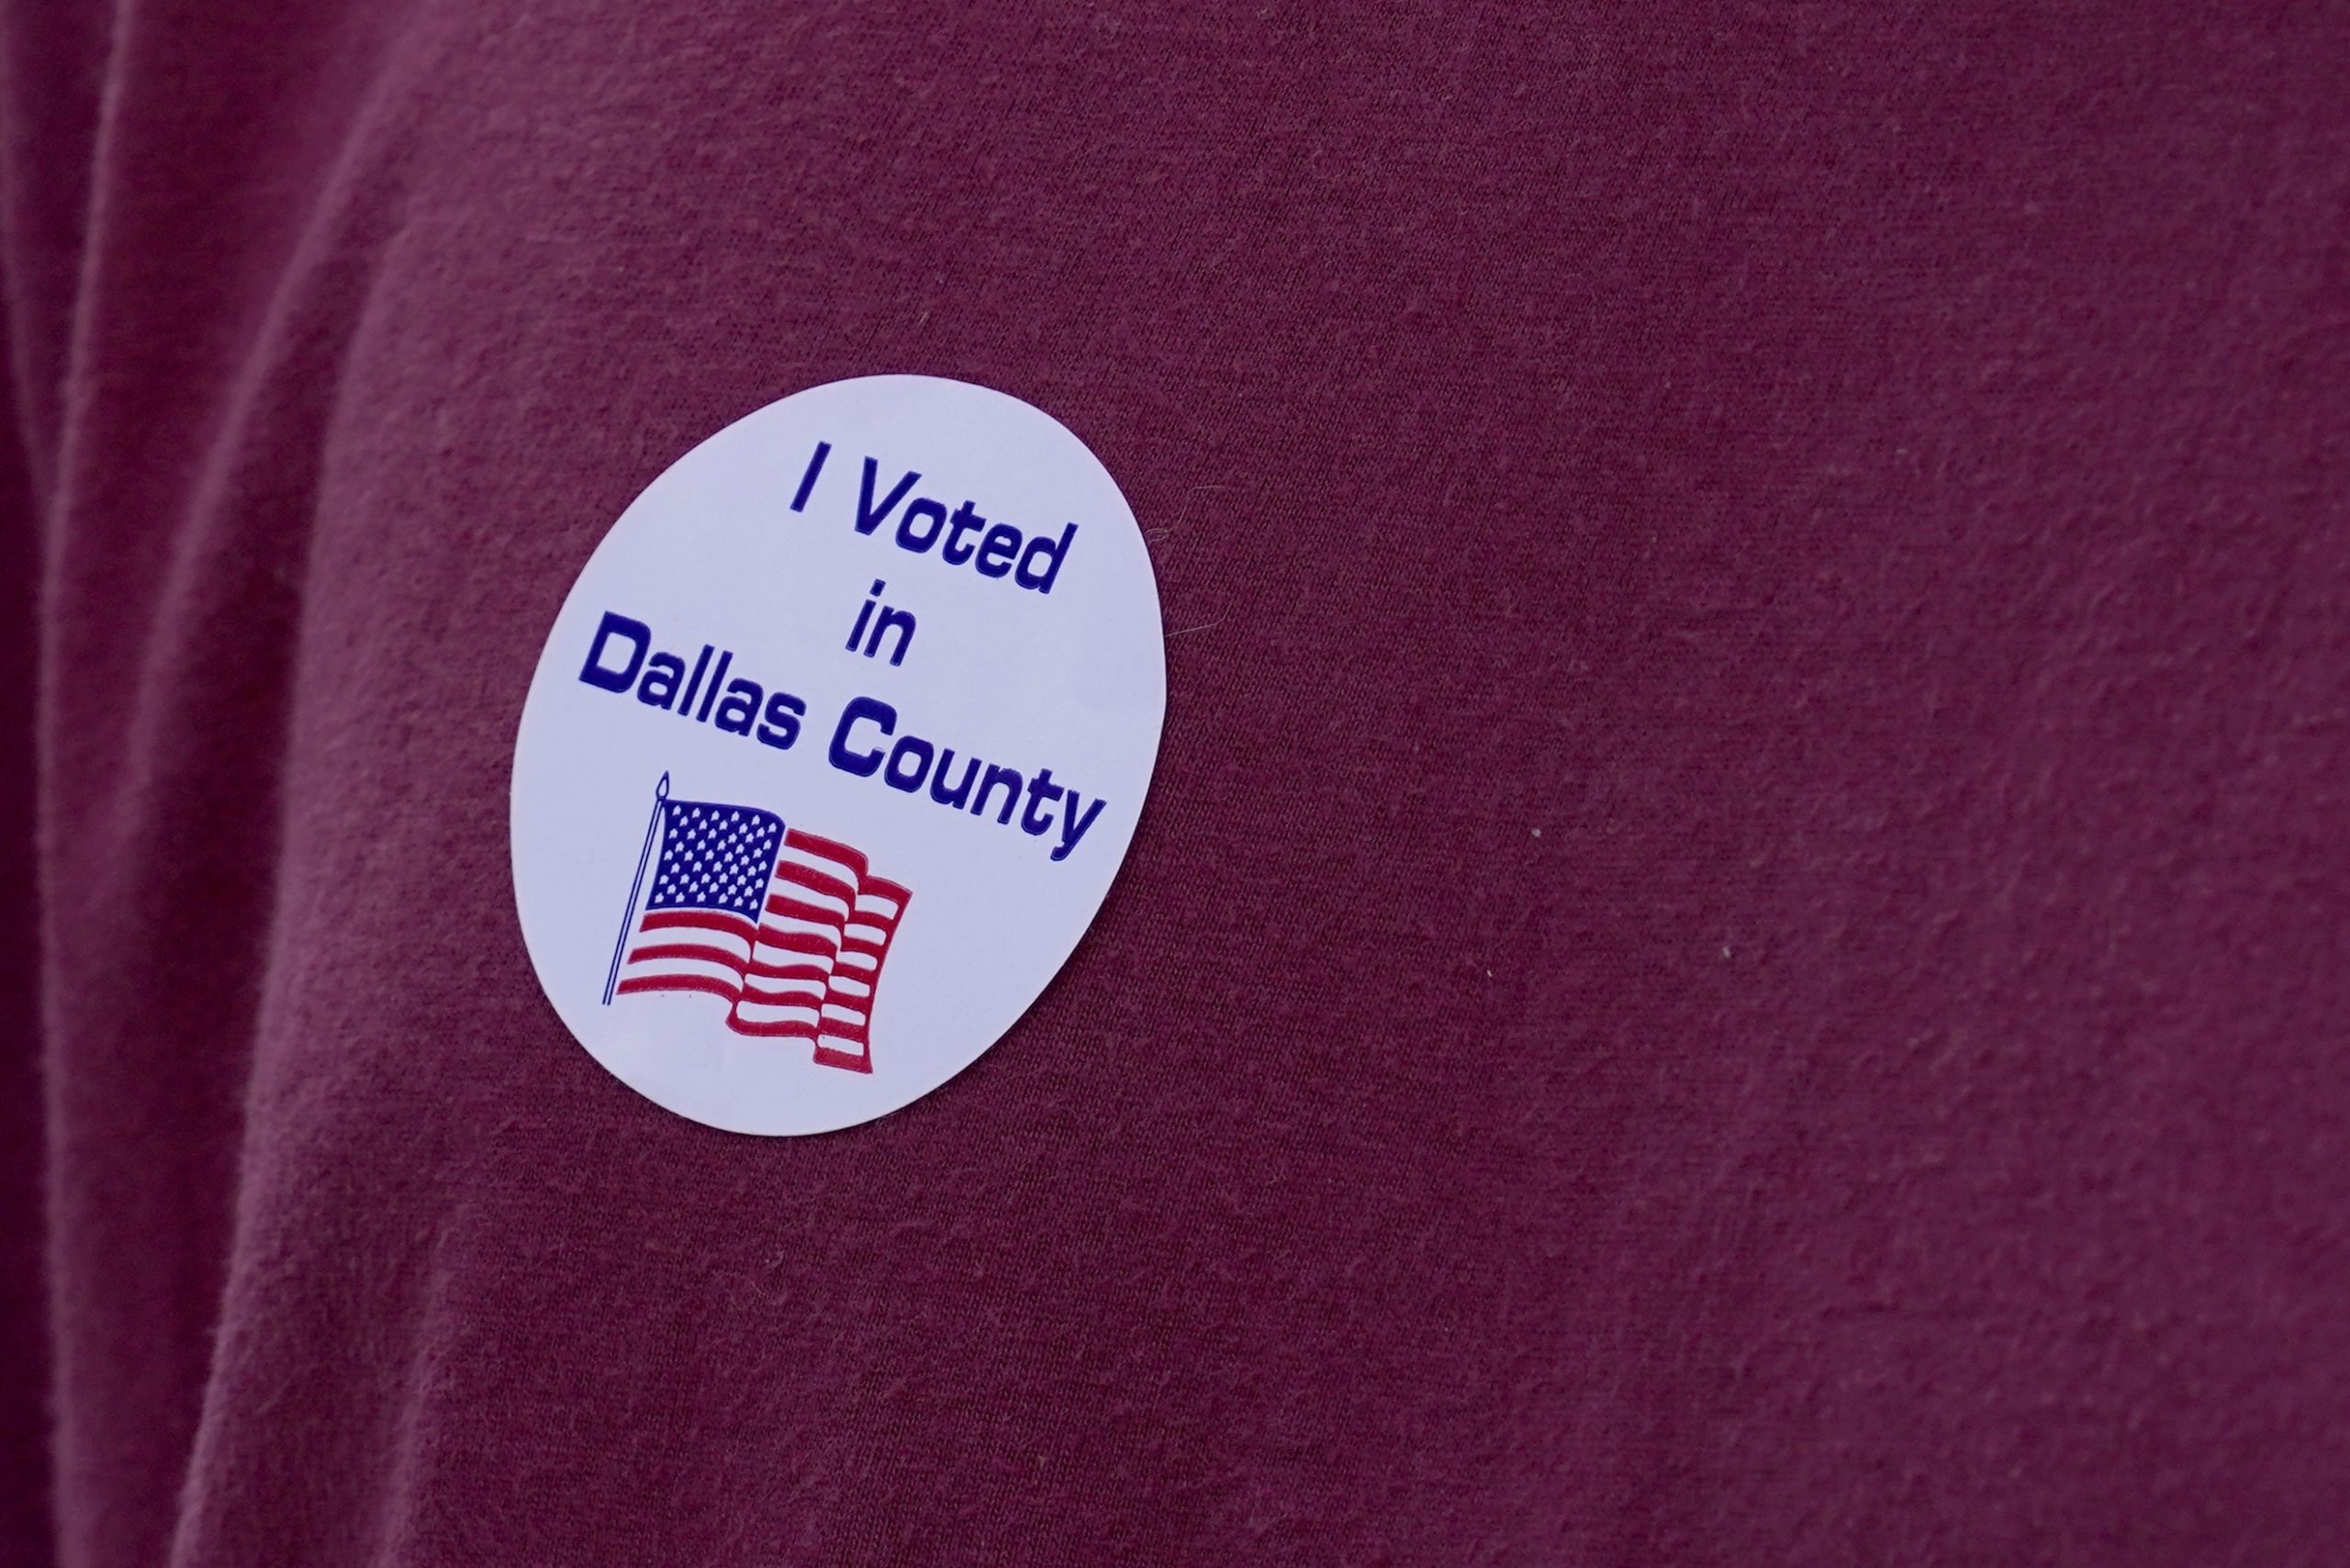 A closeup of a person's red shirt with a sticker: I voted in Dallas County. The sticker also has a wavy US flag.